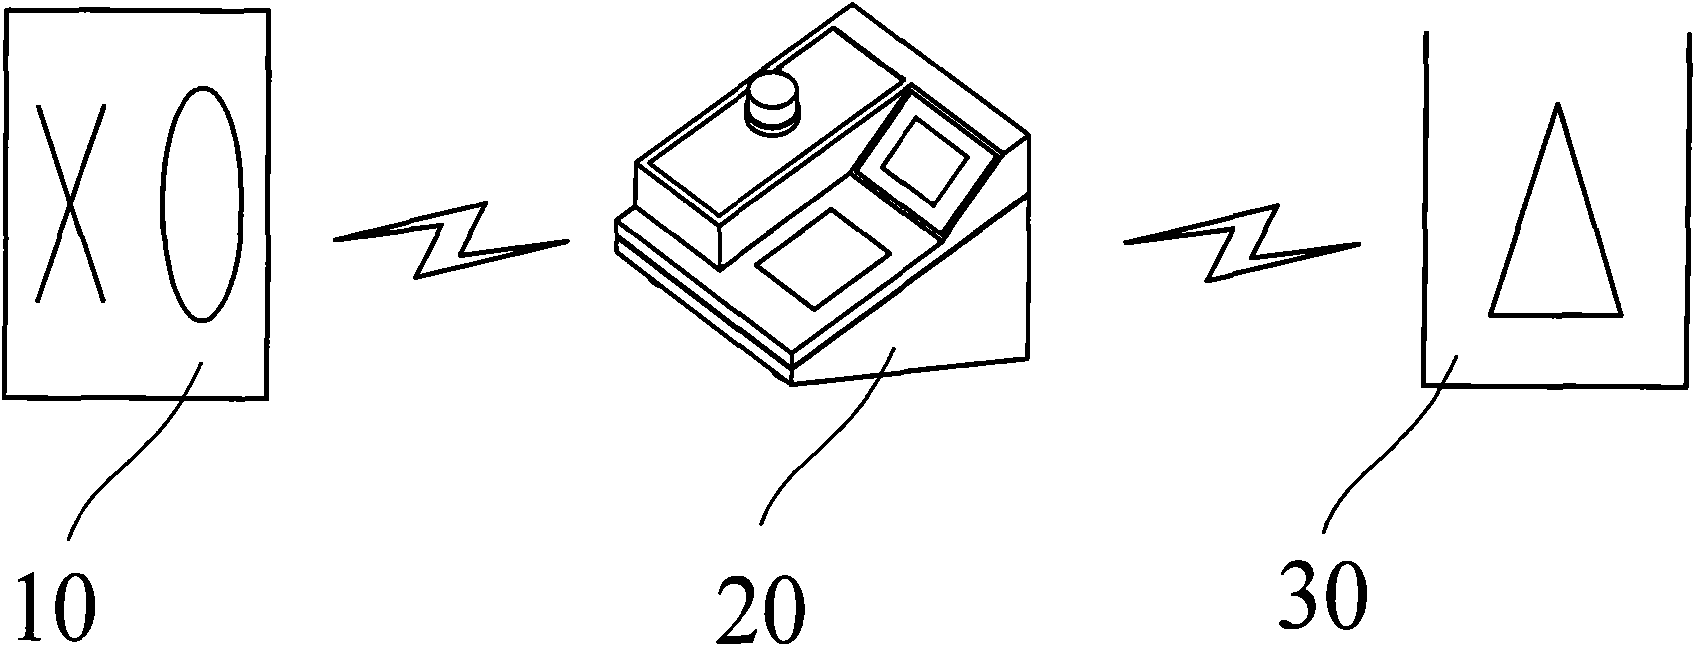 System and method for manufacturing flakes of liquid-based cytology